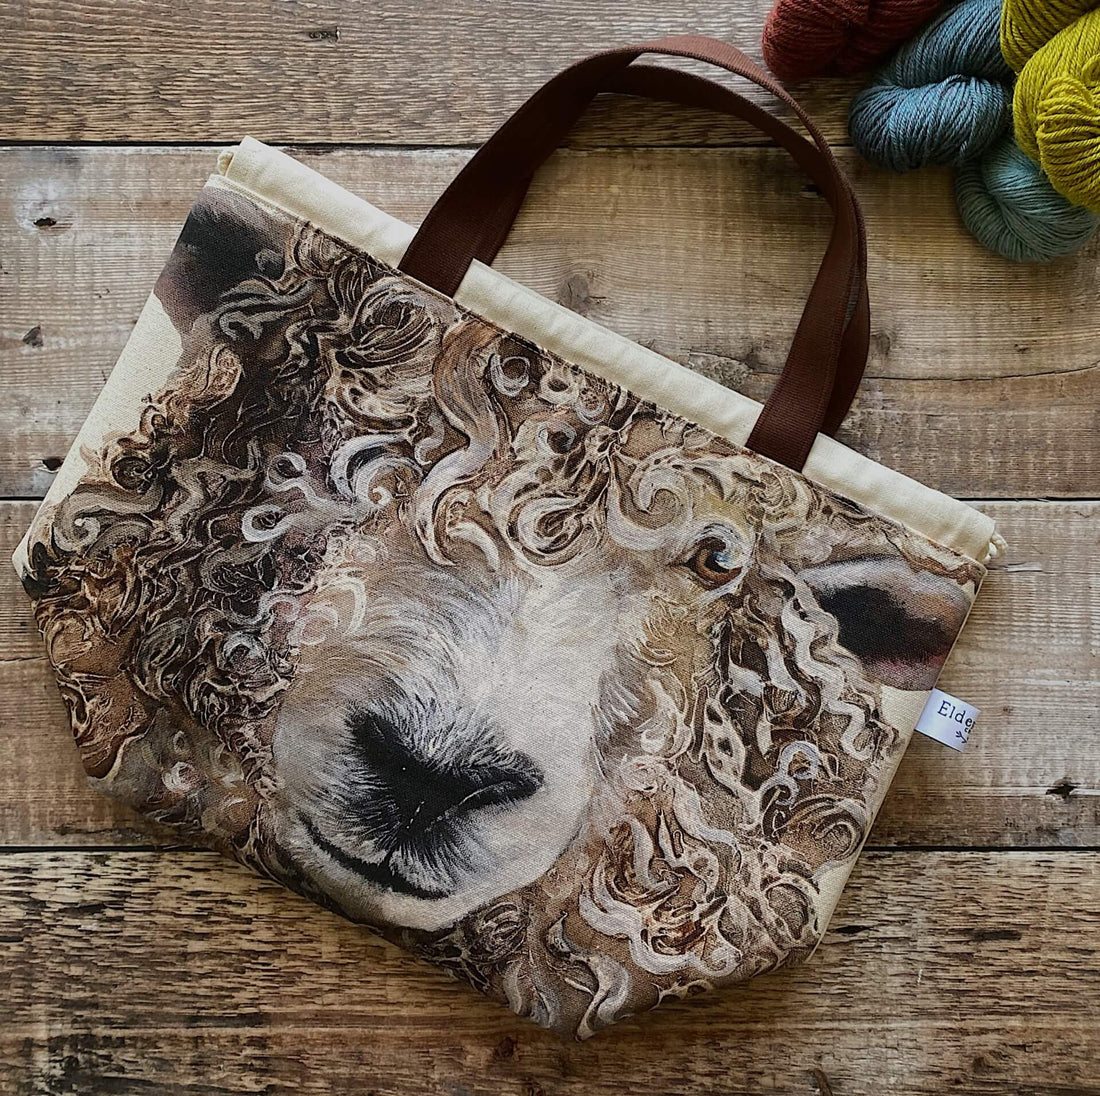 The iconic sheep knitting project bag from Eldenwood Craft